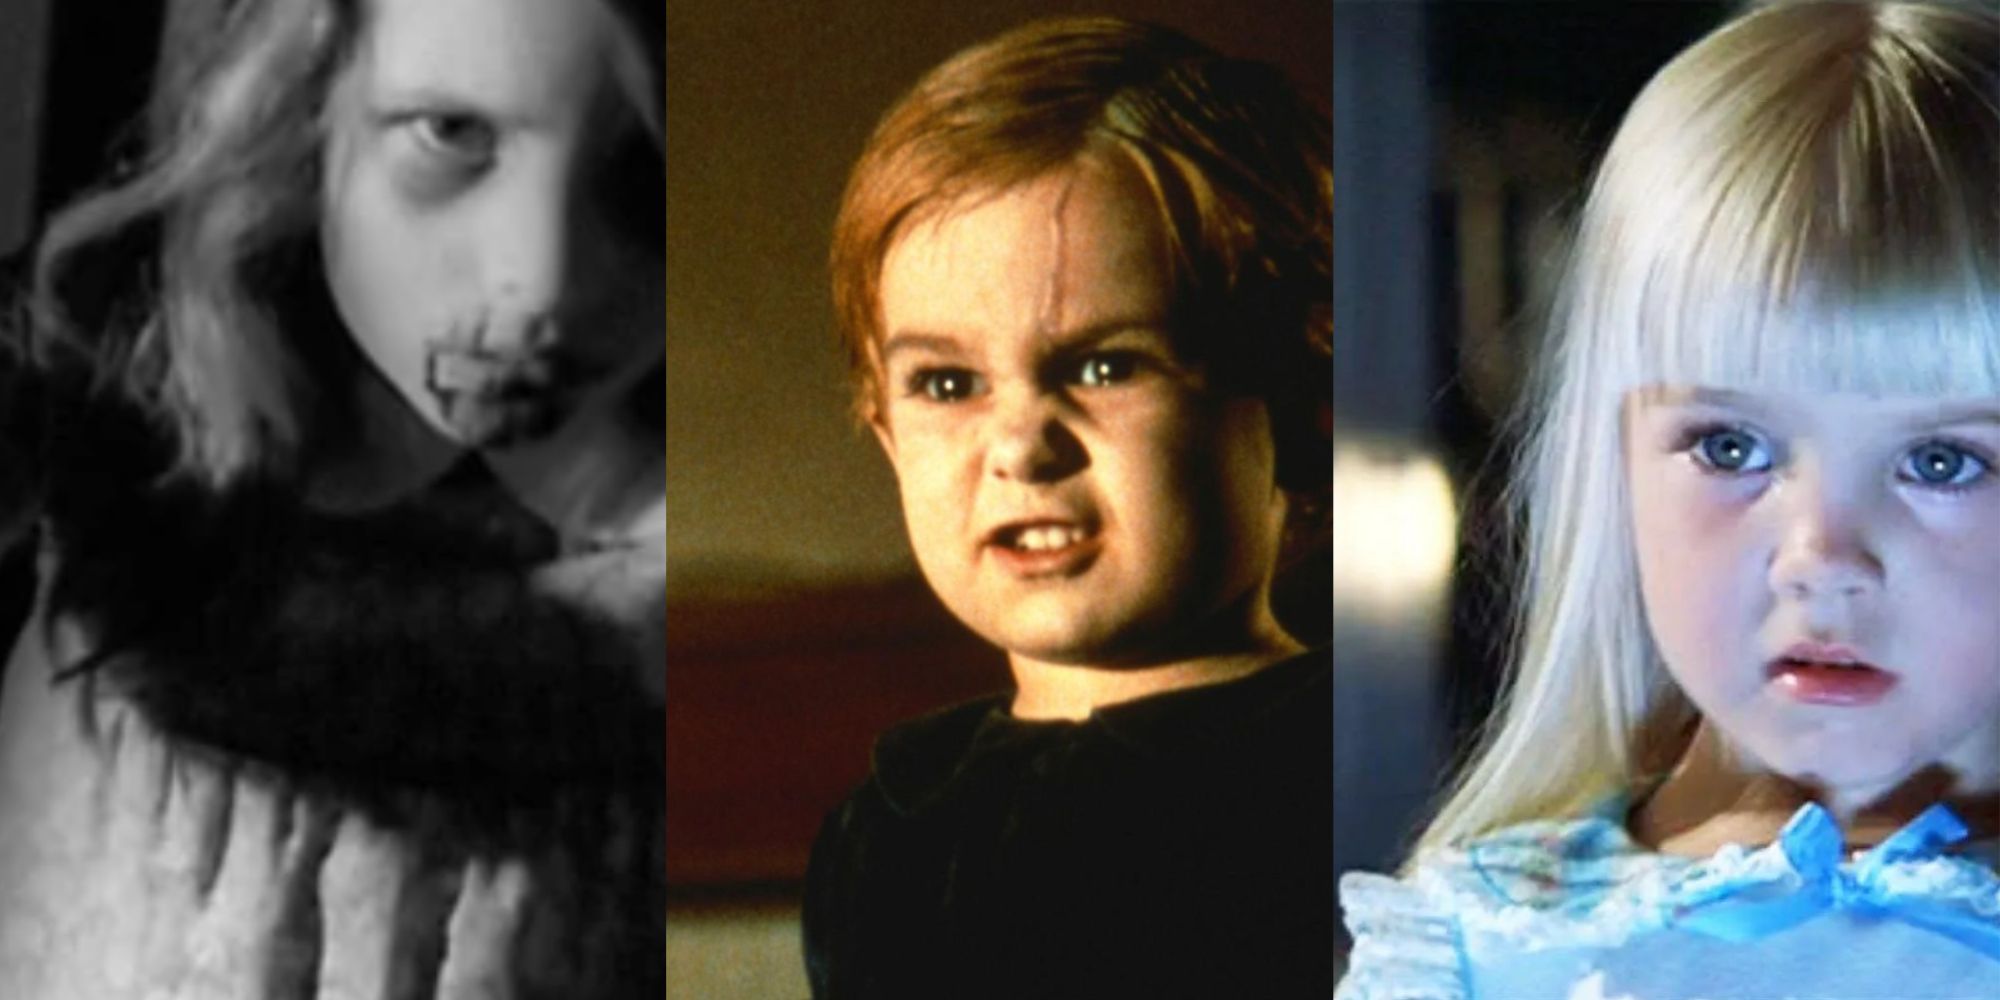 Karen Cooper from Night of the Living Dead, Gage Creed from Pet Semetary, and Carol Ann from Poltergeist. 